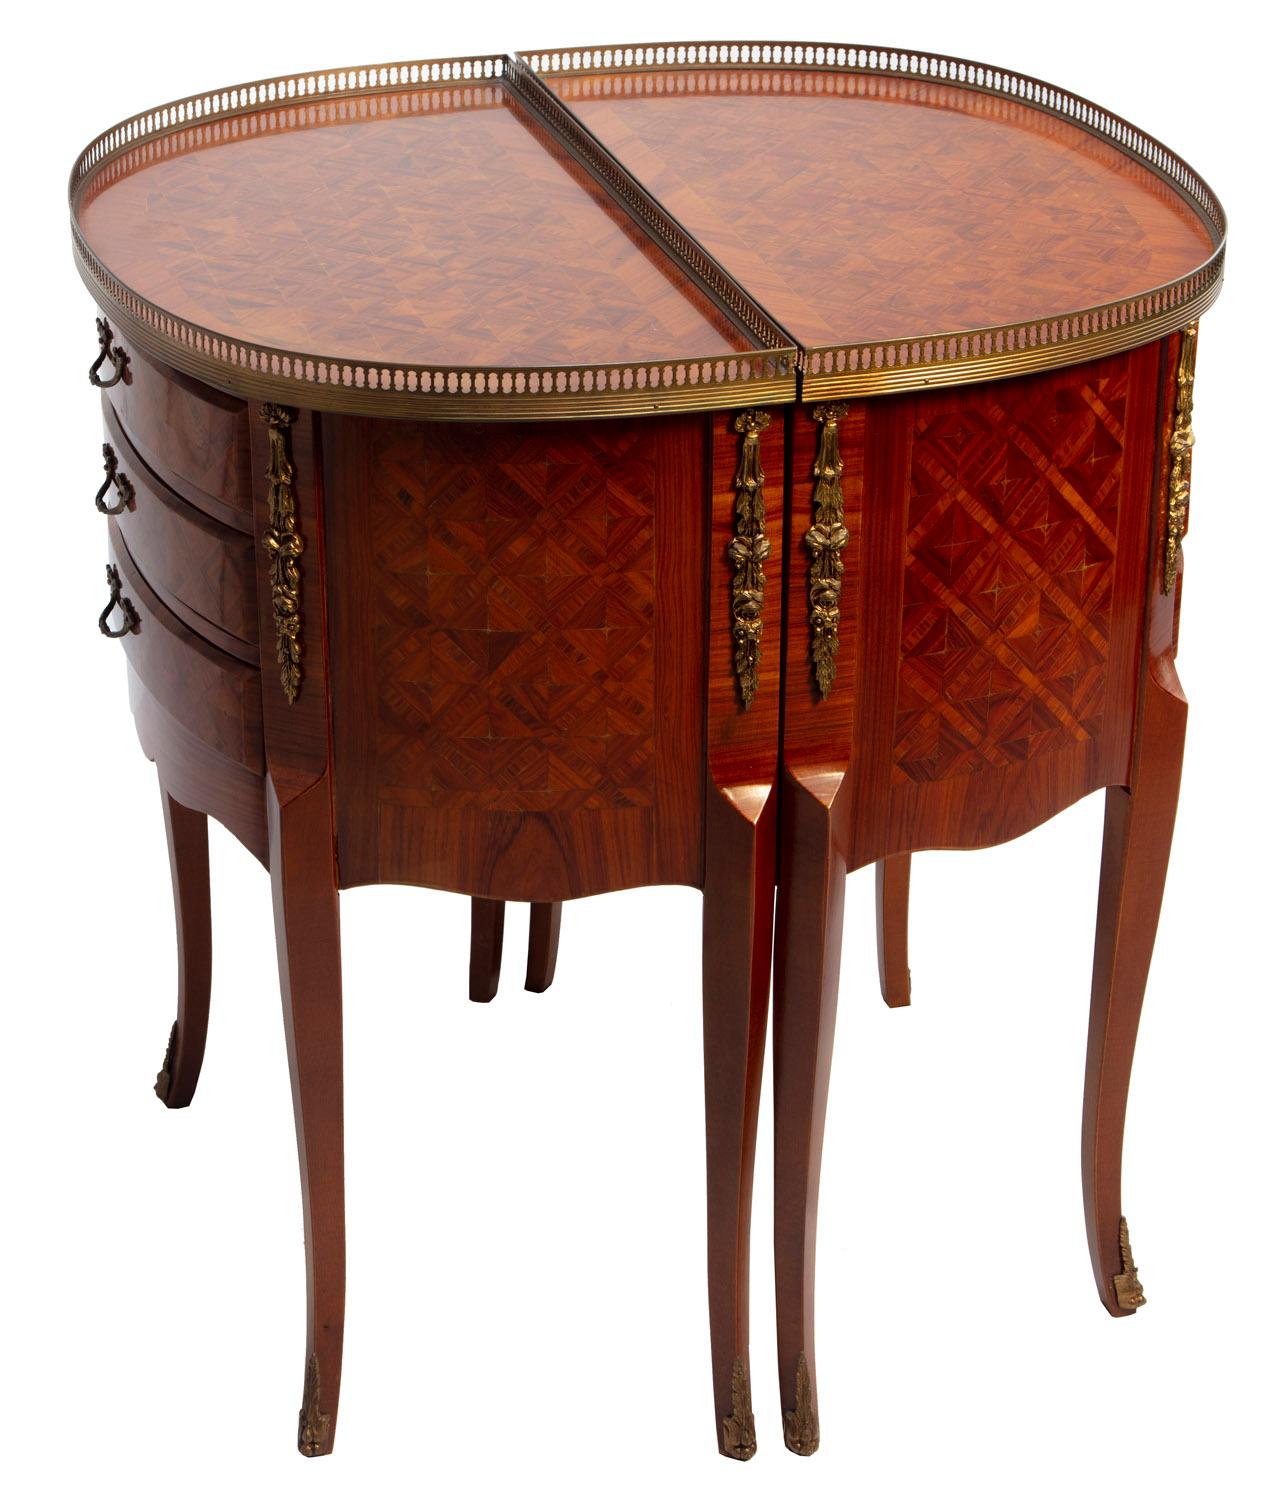 French Pair of Louis XV Marquetry Side Tables with Cocktail Gallery and Ormolu